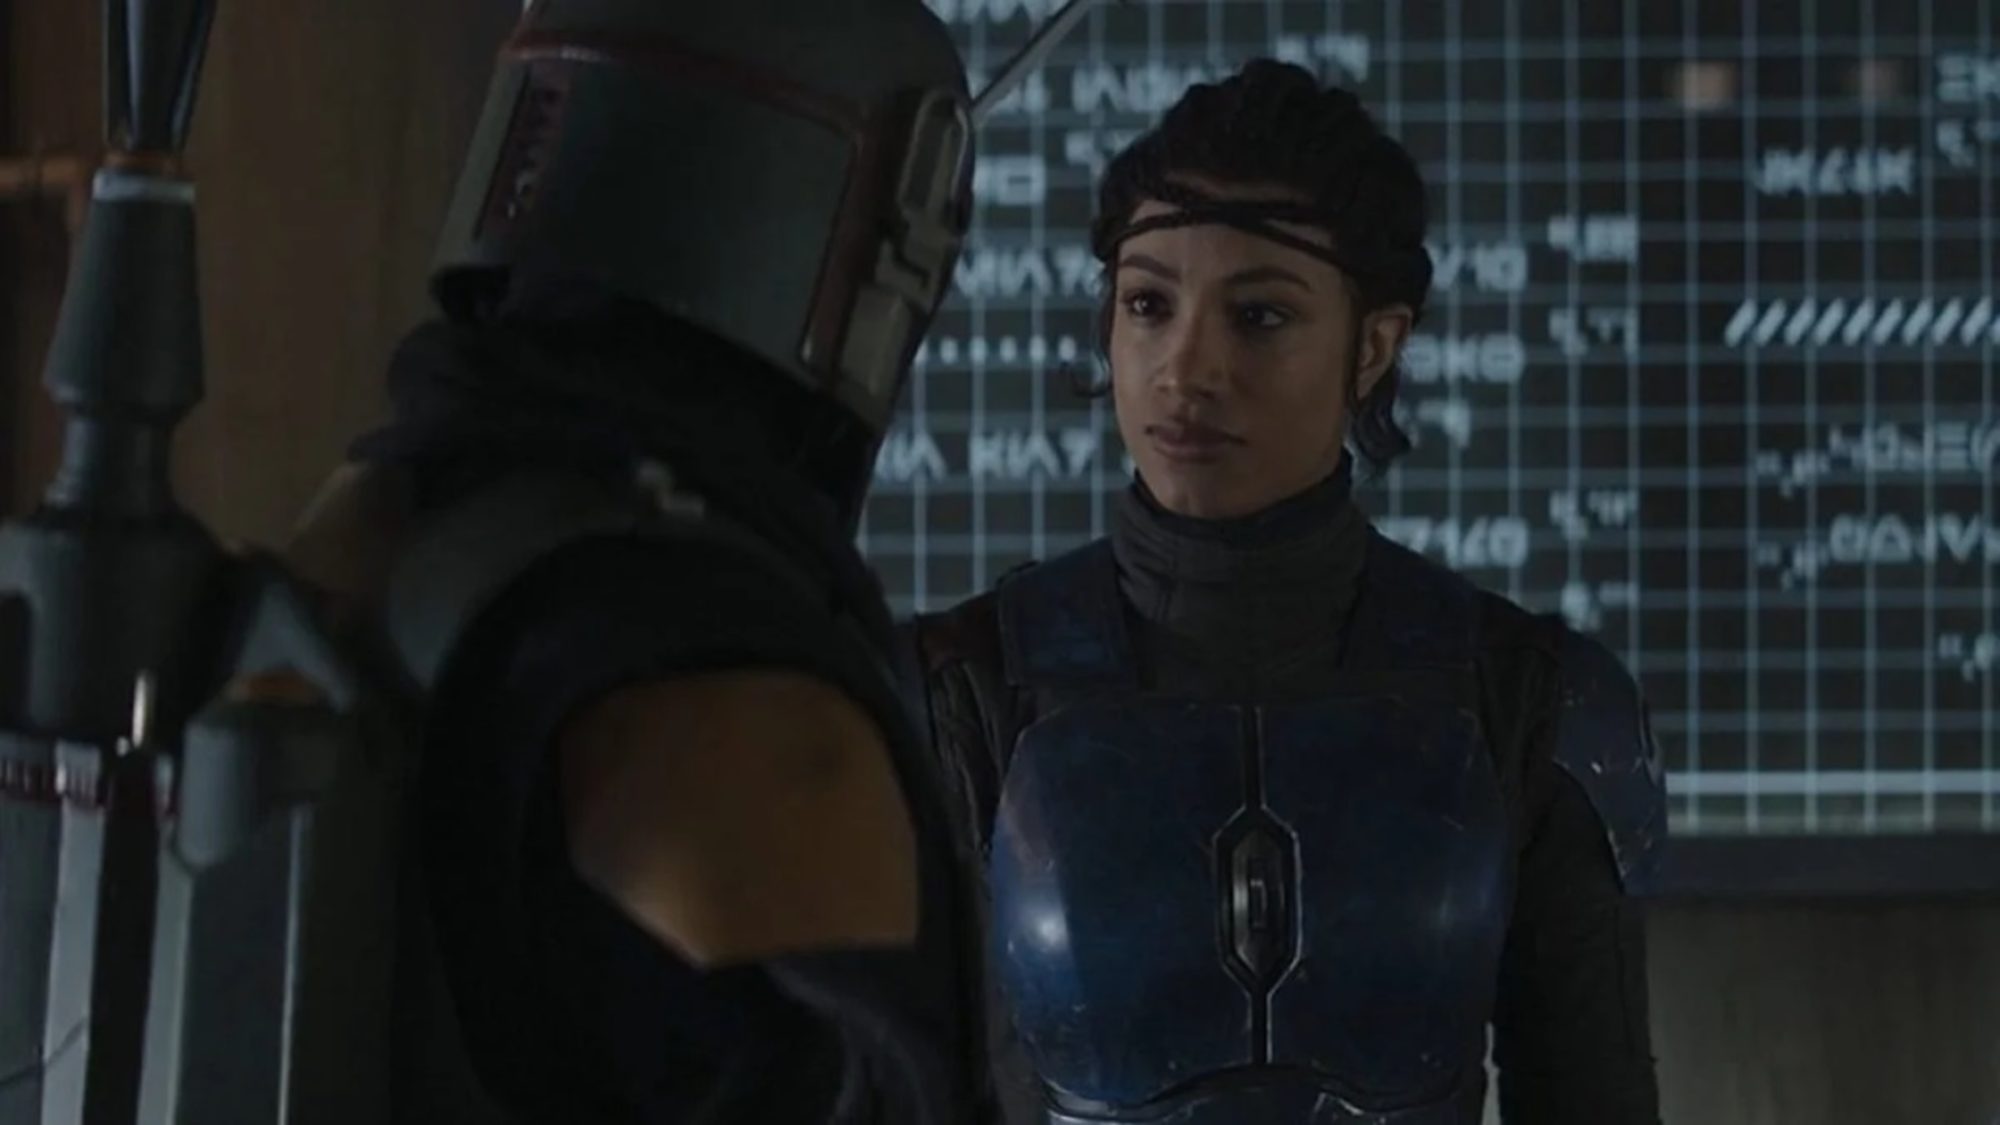 Mercedes Moné Opens Up About WWE's Resistance to 'The Mandalorian' Role